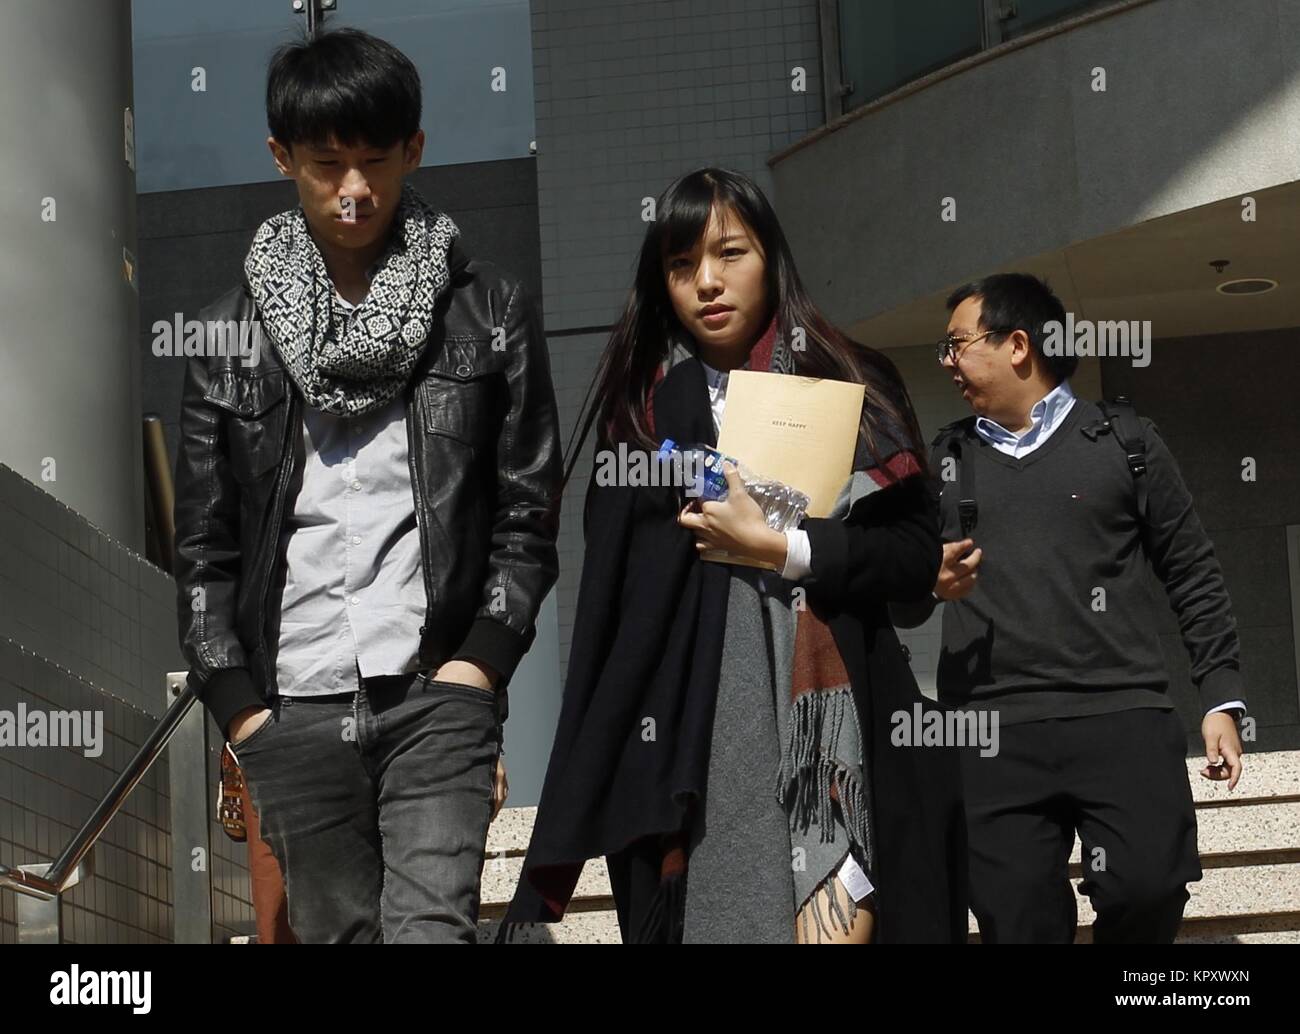 Hong Kong, CHINA. 18th Dec, 2017. Disqualified Localist lawmakers of the pro-Hong Kong Independence political party YOUNGSPIRATION, Baggio Leung ( L ) and Yau Wai-ching ( R ) walk out of Kowloon City Magistracy. Both Leung and Yau are charged with unlawful assembly inside LEGICO building and forced entry into conference room. Case adjourned for tomorrow 19-December. 18-December 2017.Hong Kong.ZUMA/Liau Chung Ren Credit: Liau Chung Ren/ZUMA Wire/Alamy Live News Stock Photo